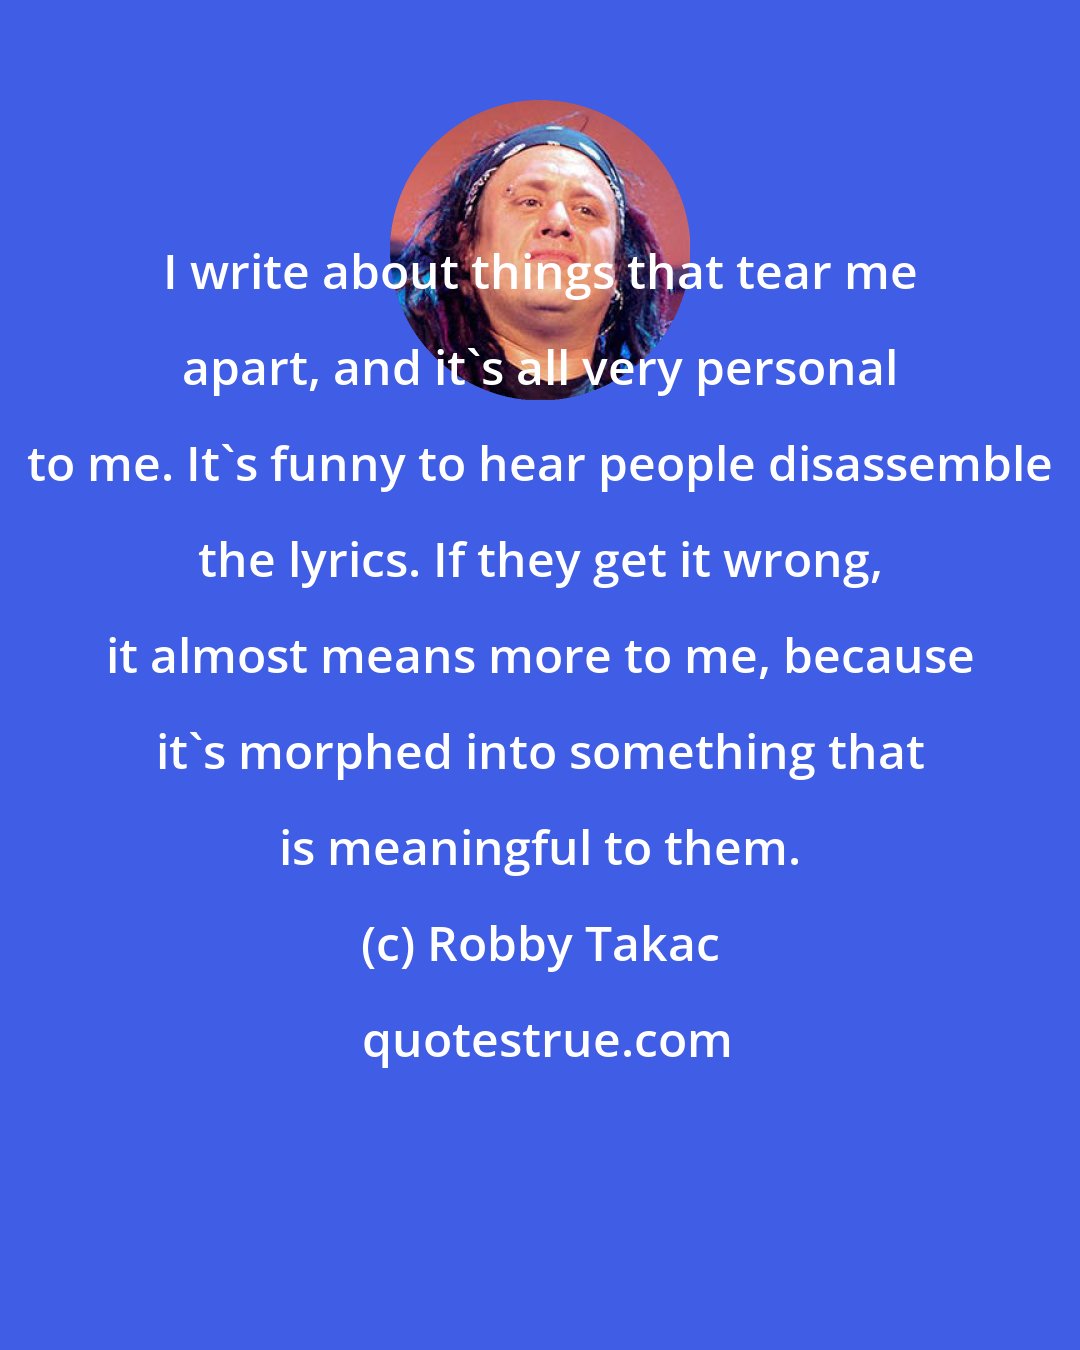 Robby Takac: I write about things that tear me apart, and it's all very personal to me. It's funny to hear people disassemble the lyrics. If they get it wrong, it almost means more to me, because it's morphed into something that is meaningful to them.